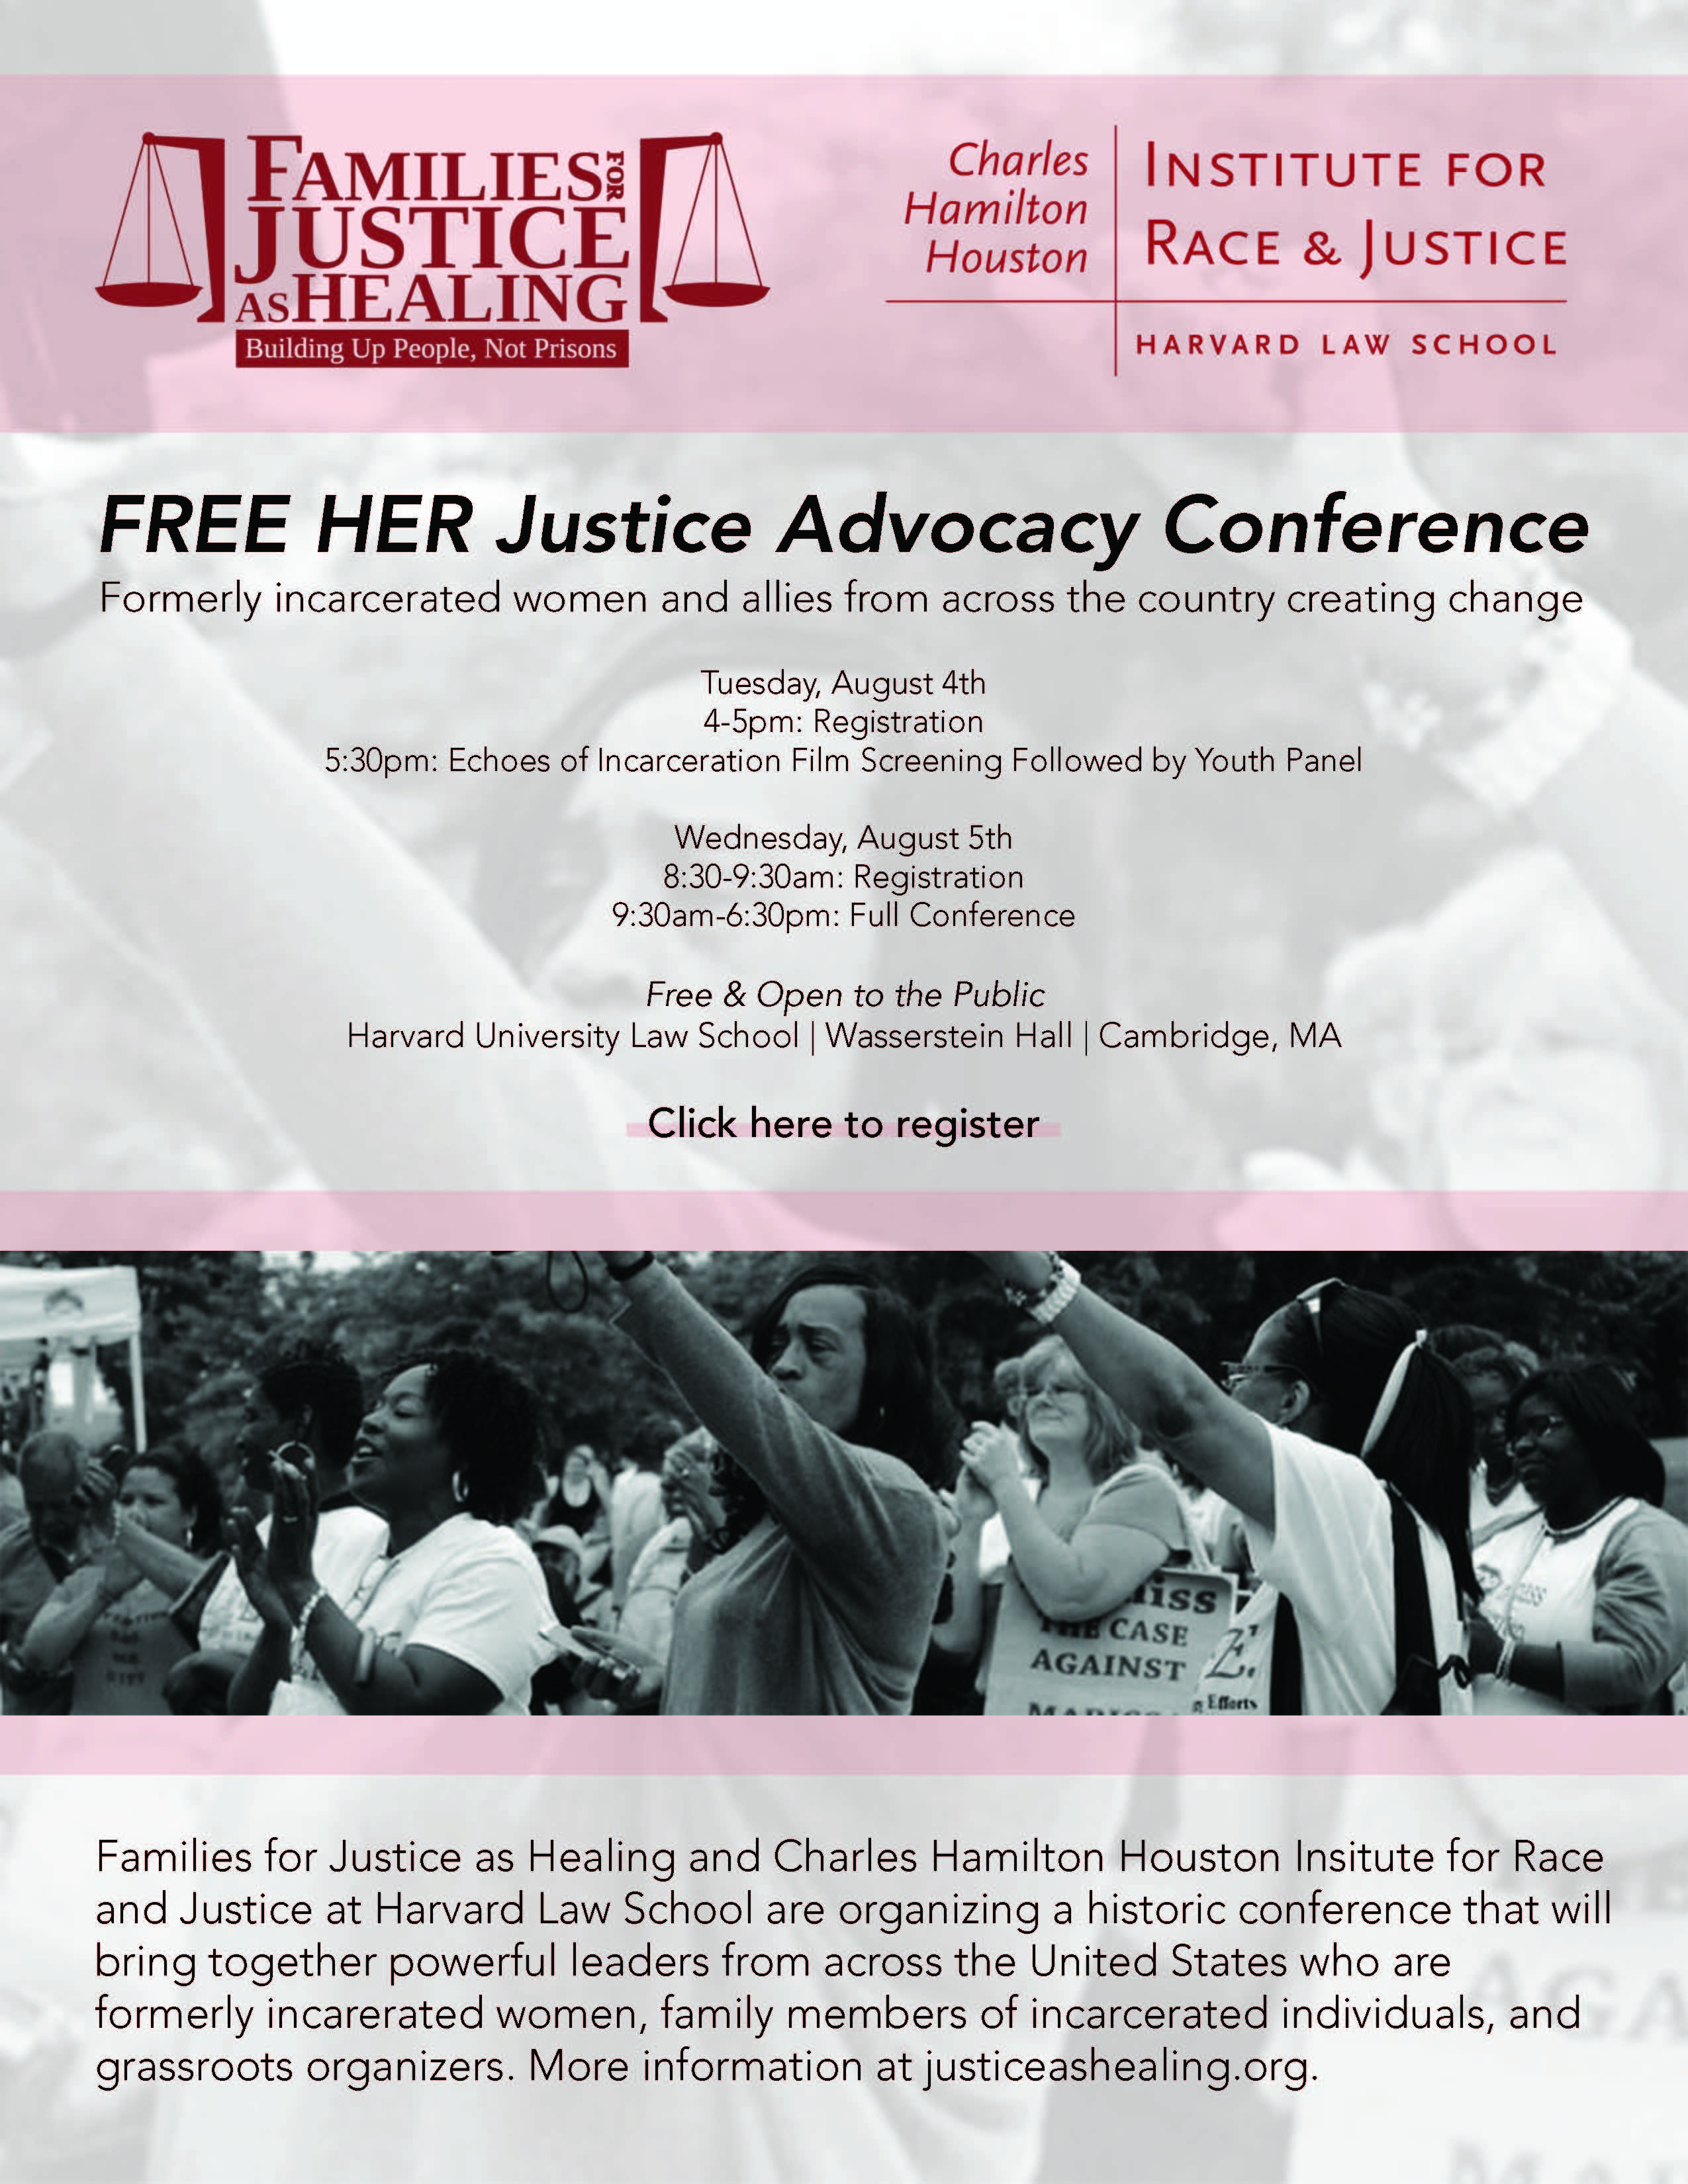 Free Her Conference Charles Hamilton Houston Institute for Race & Justice